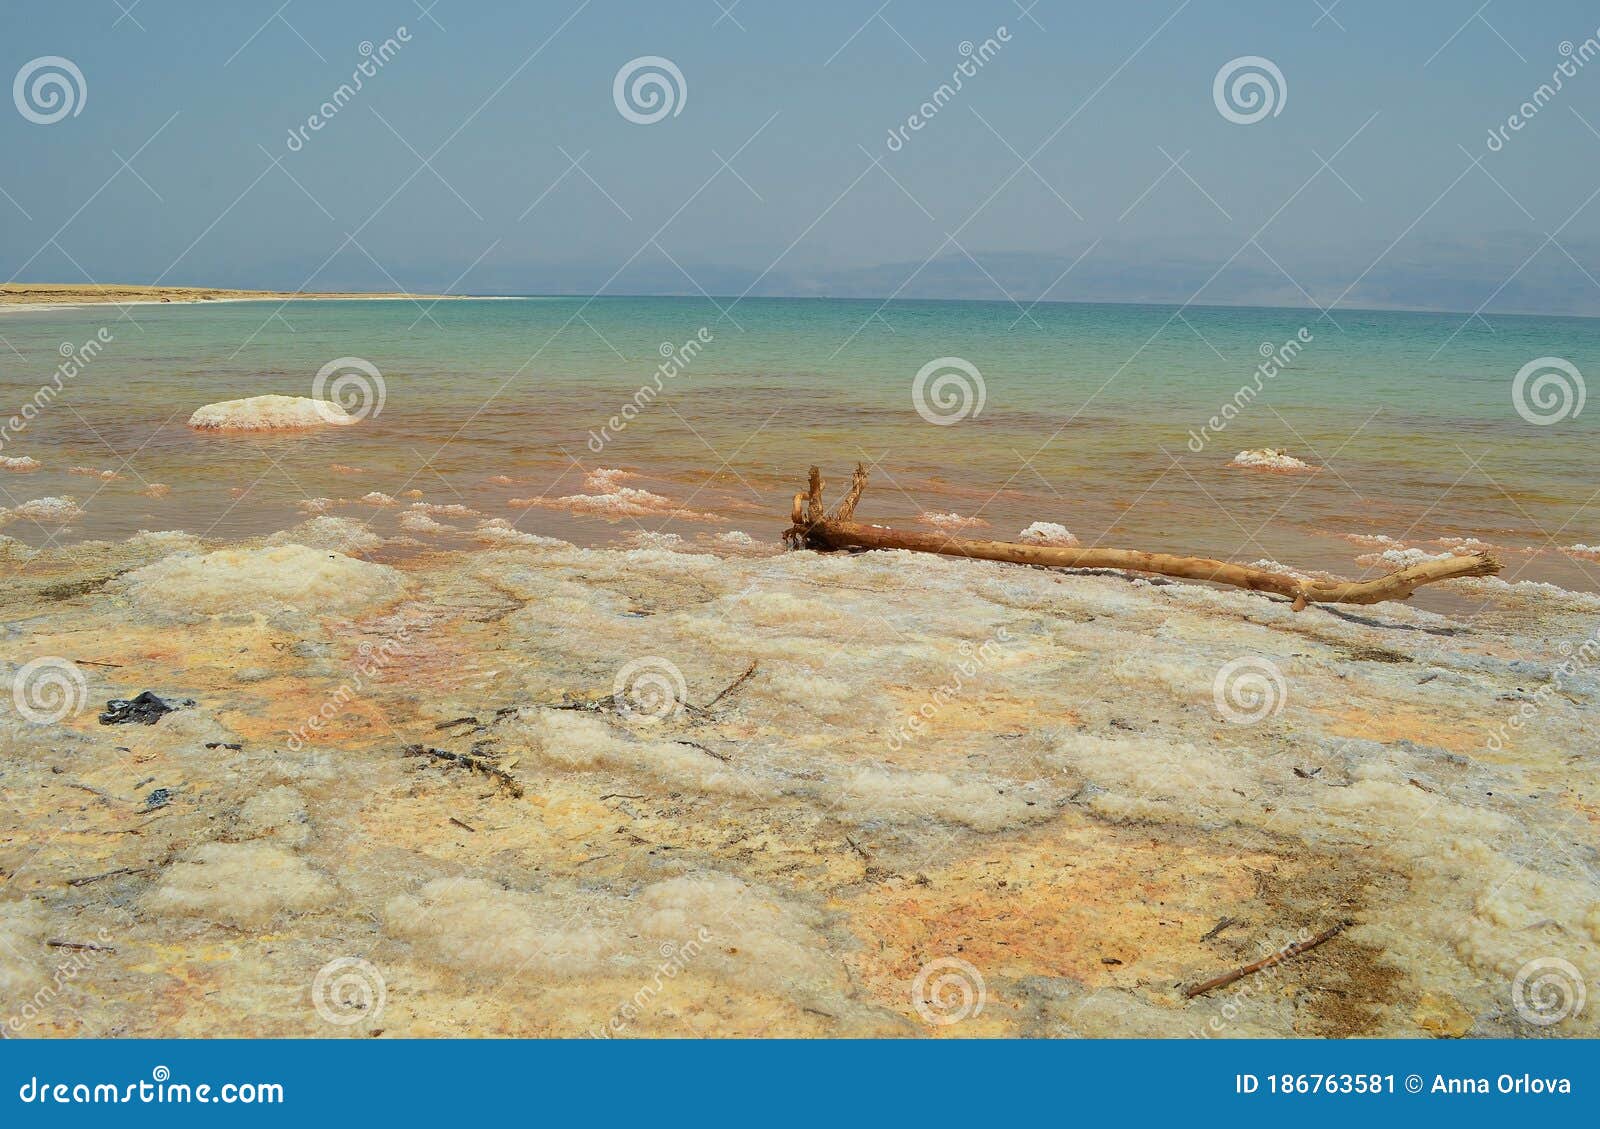 Salt Formations On The Shores Of The Dead Sea Stock Image Image Of